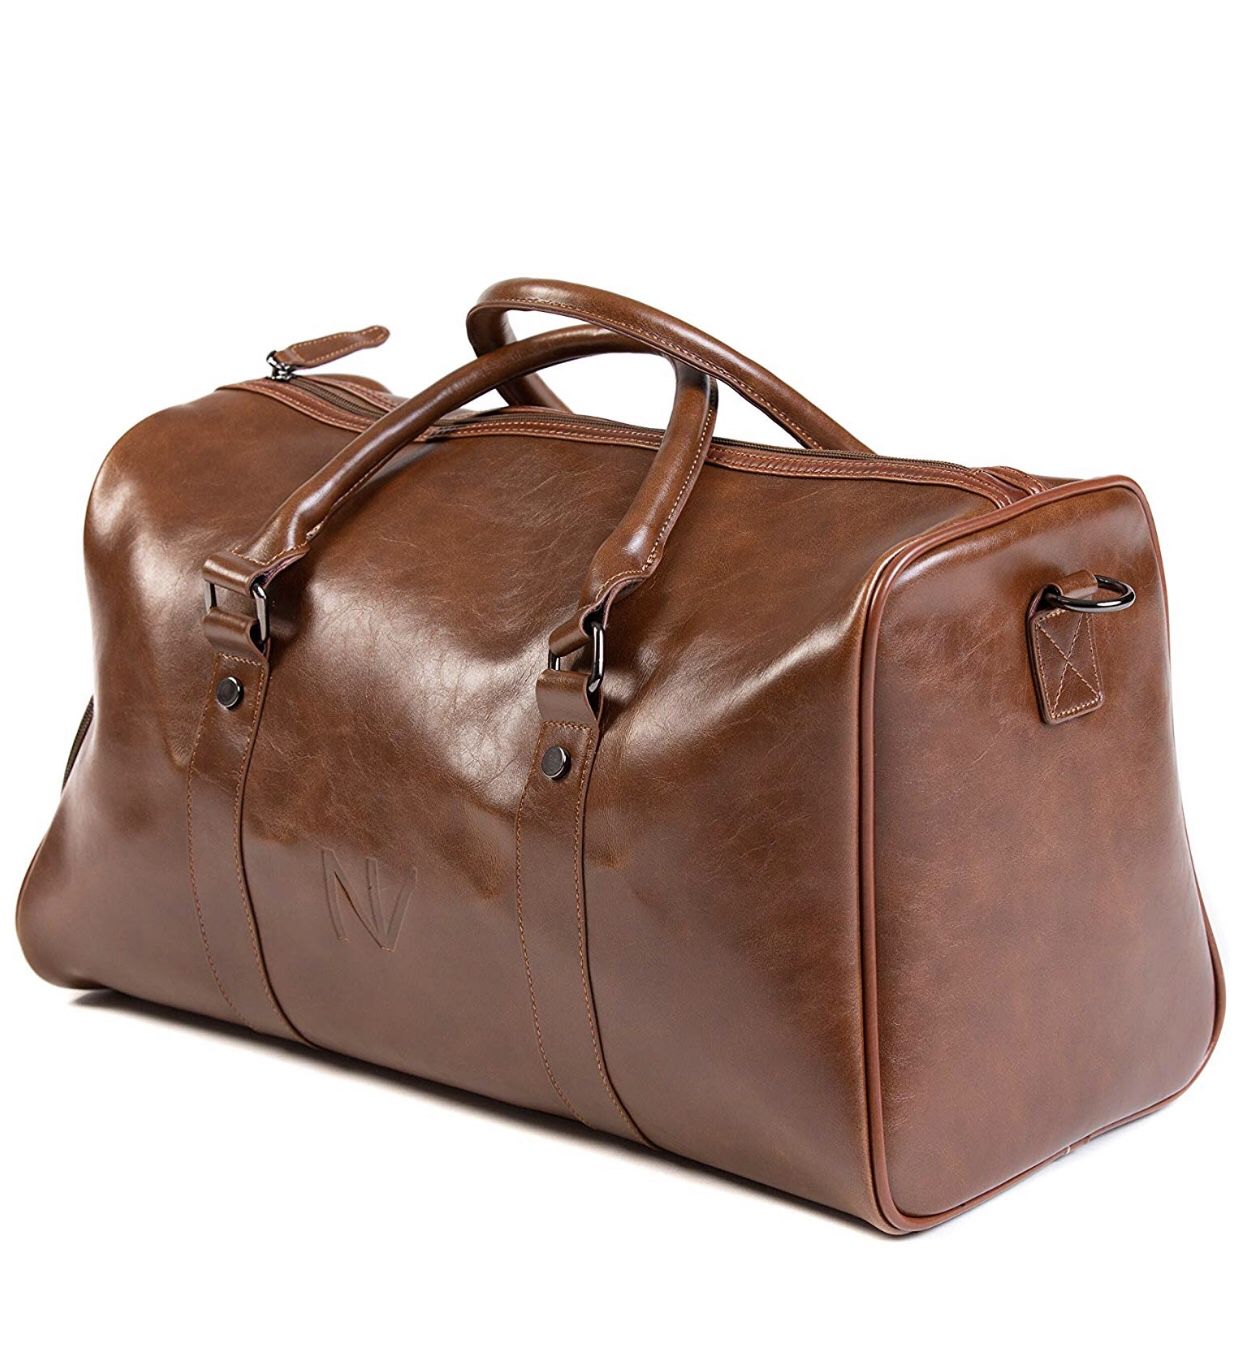 Duffle Gym Travel Duffel Leather Sports Overnight Weekender Brown Bag (Brown)